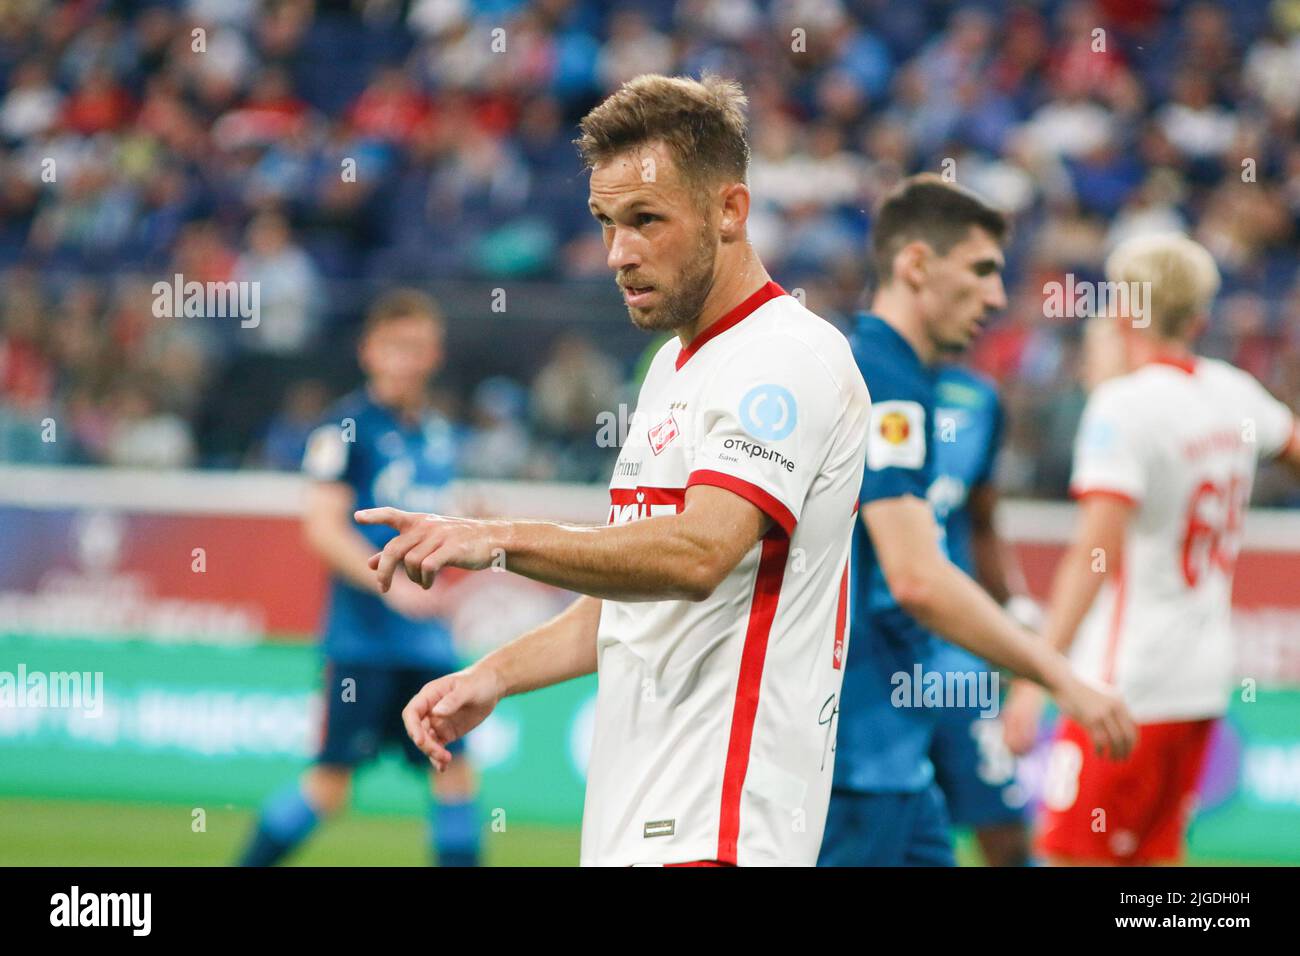 Saint Petersburg, Russia. 09th July, 2022. Maciej Rybus (No.13) of Spartak seen during the Olimpbet Russian Football Super Cup football match between Zenit Saint Petersburg and Spartak Moscow at Gazprom Arena. Final score; Zenit 4:0 Spartak. (Photo by Maksim Konstantinov/SOPA Images/Sipa USA) Credit: Sipa USA/Alamy Live News Stock Photo